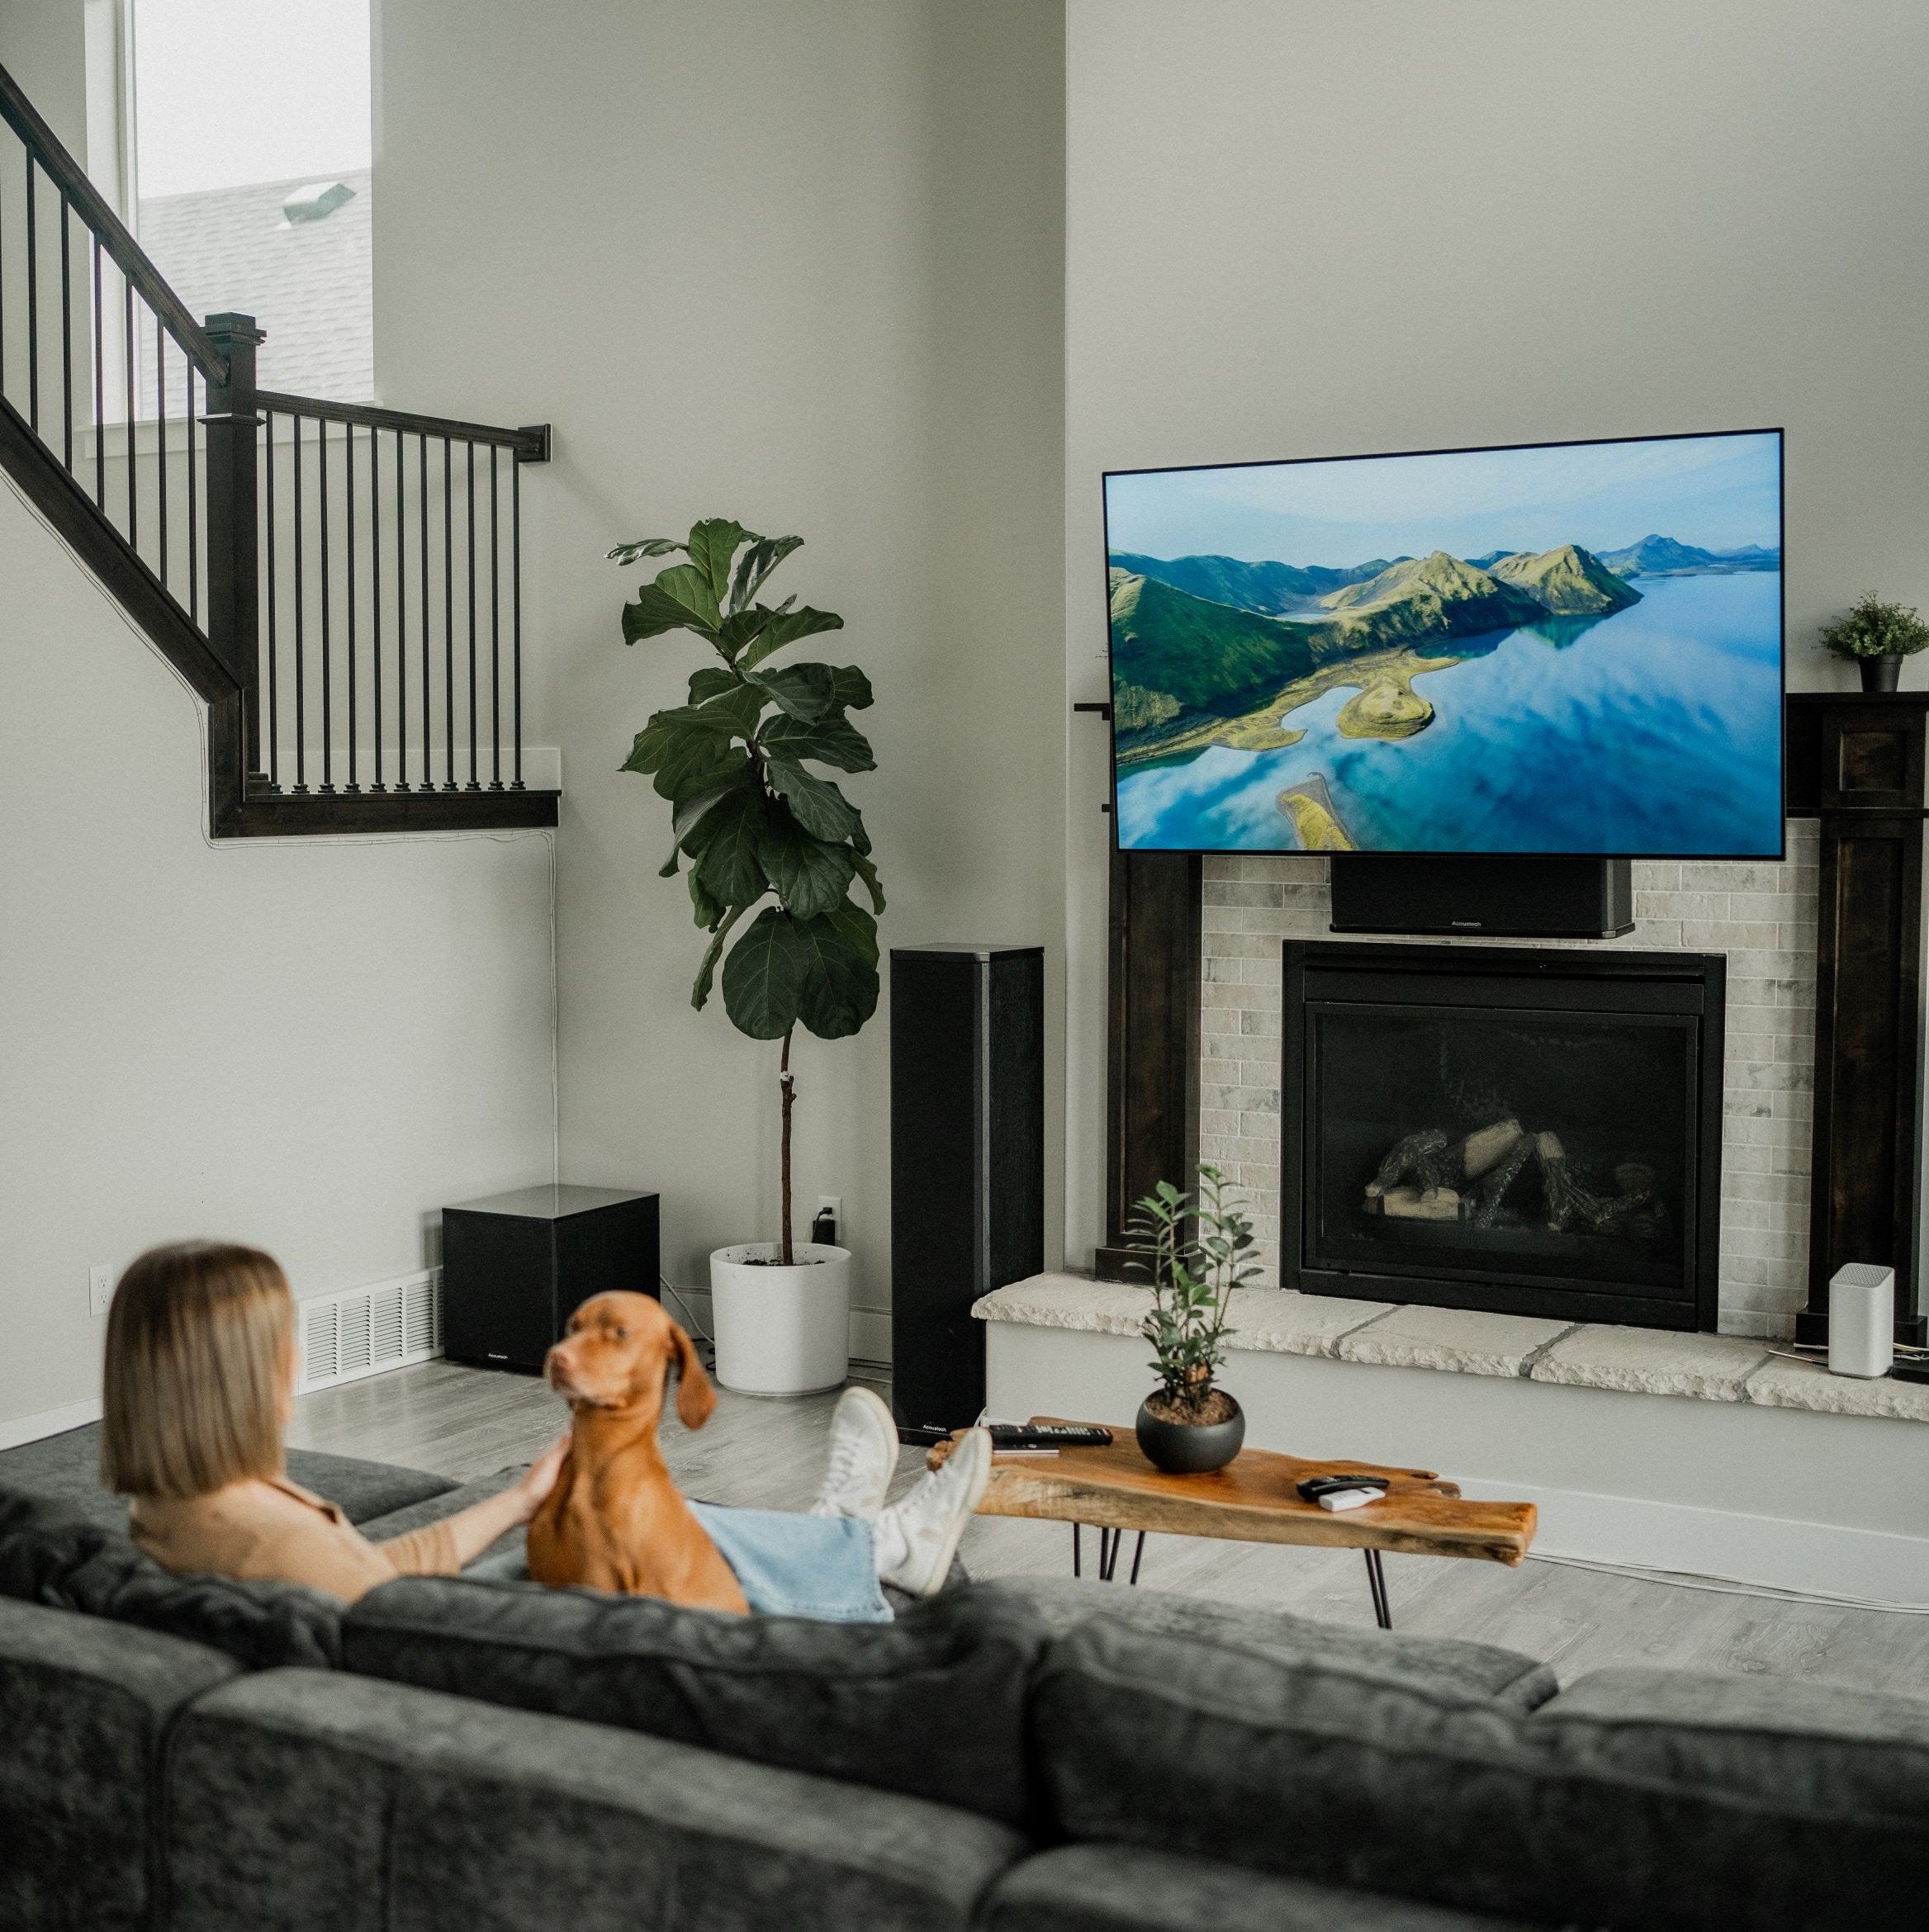 TV Mount: Make the Most of Your Living Space